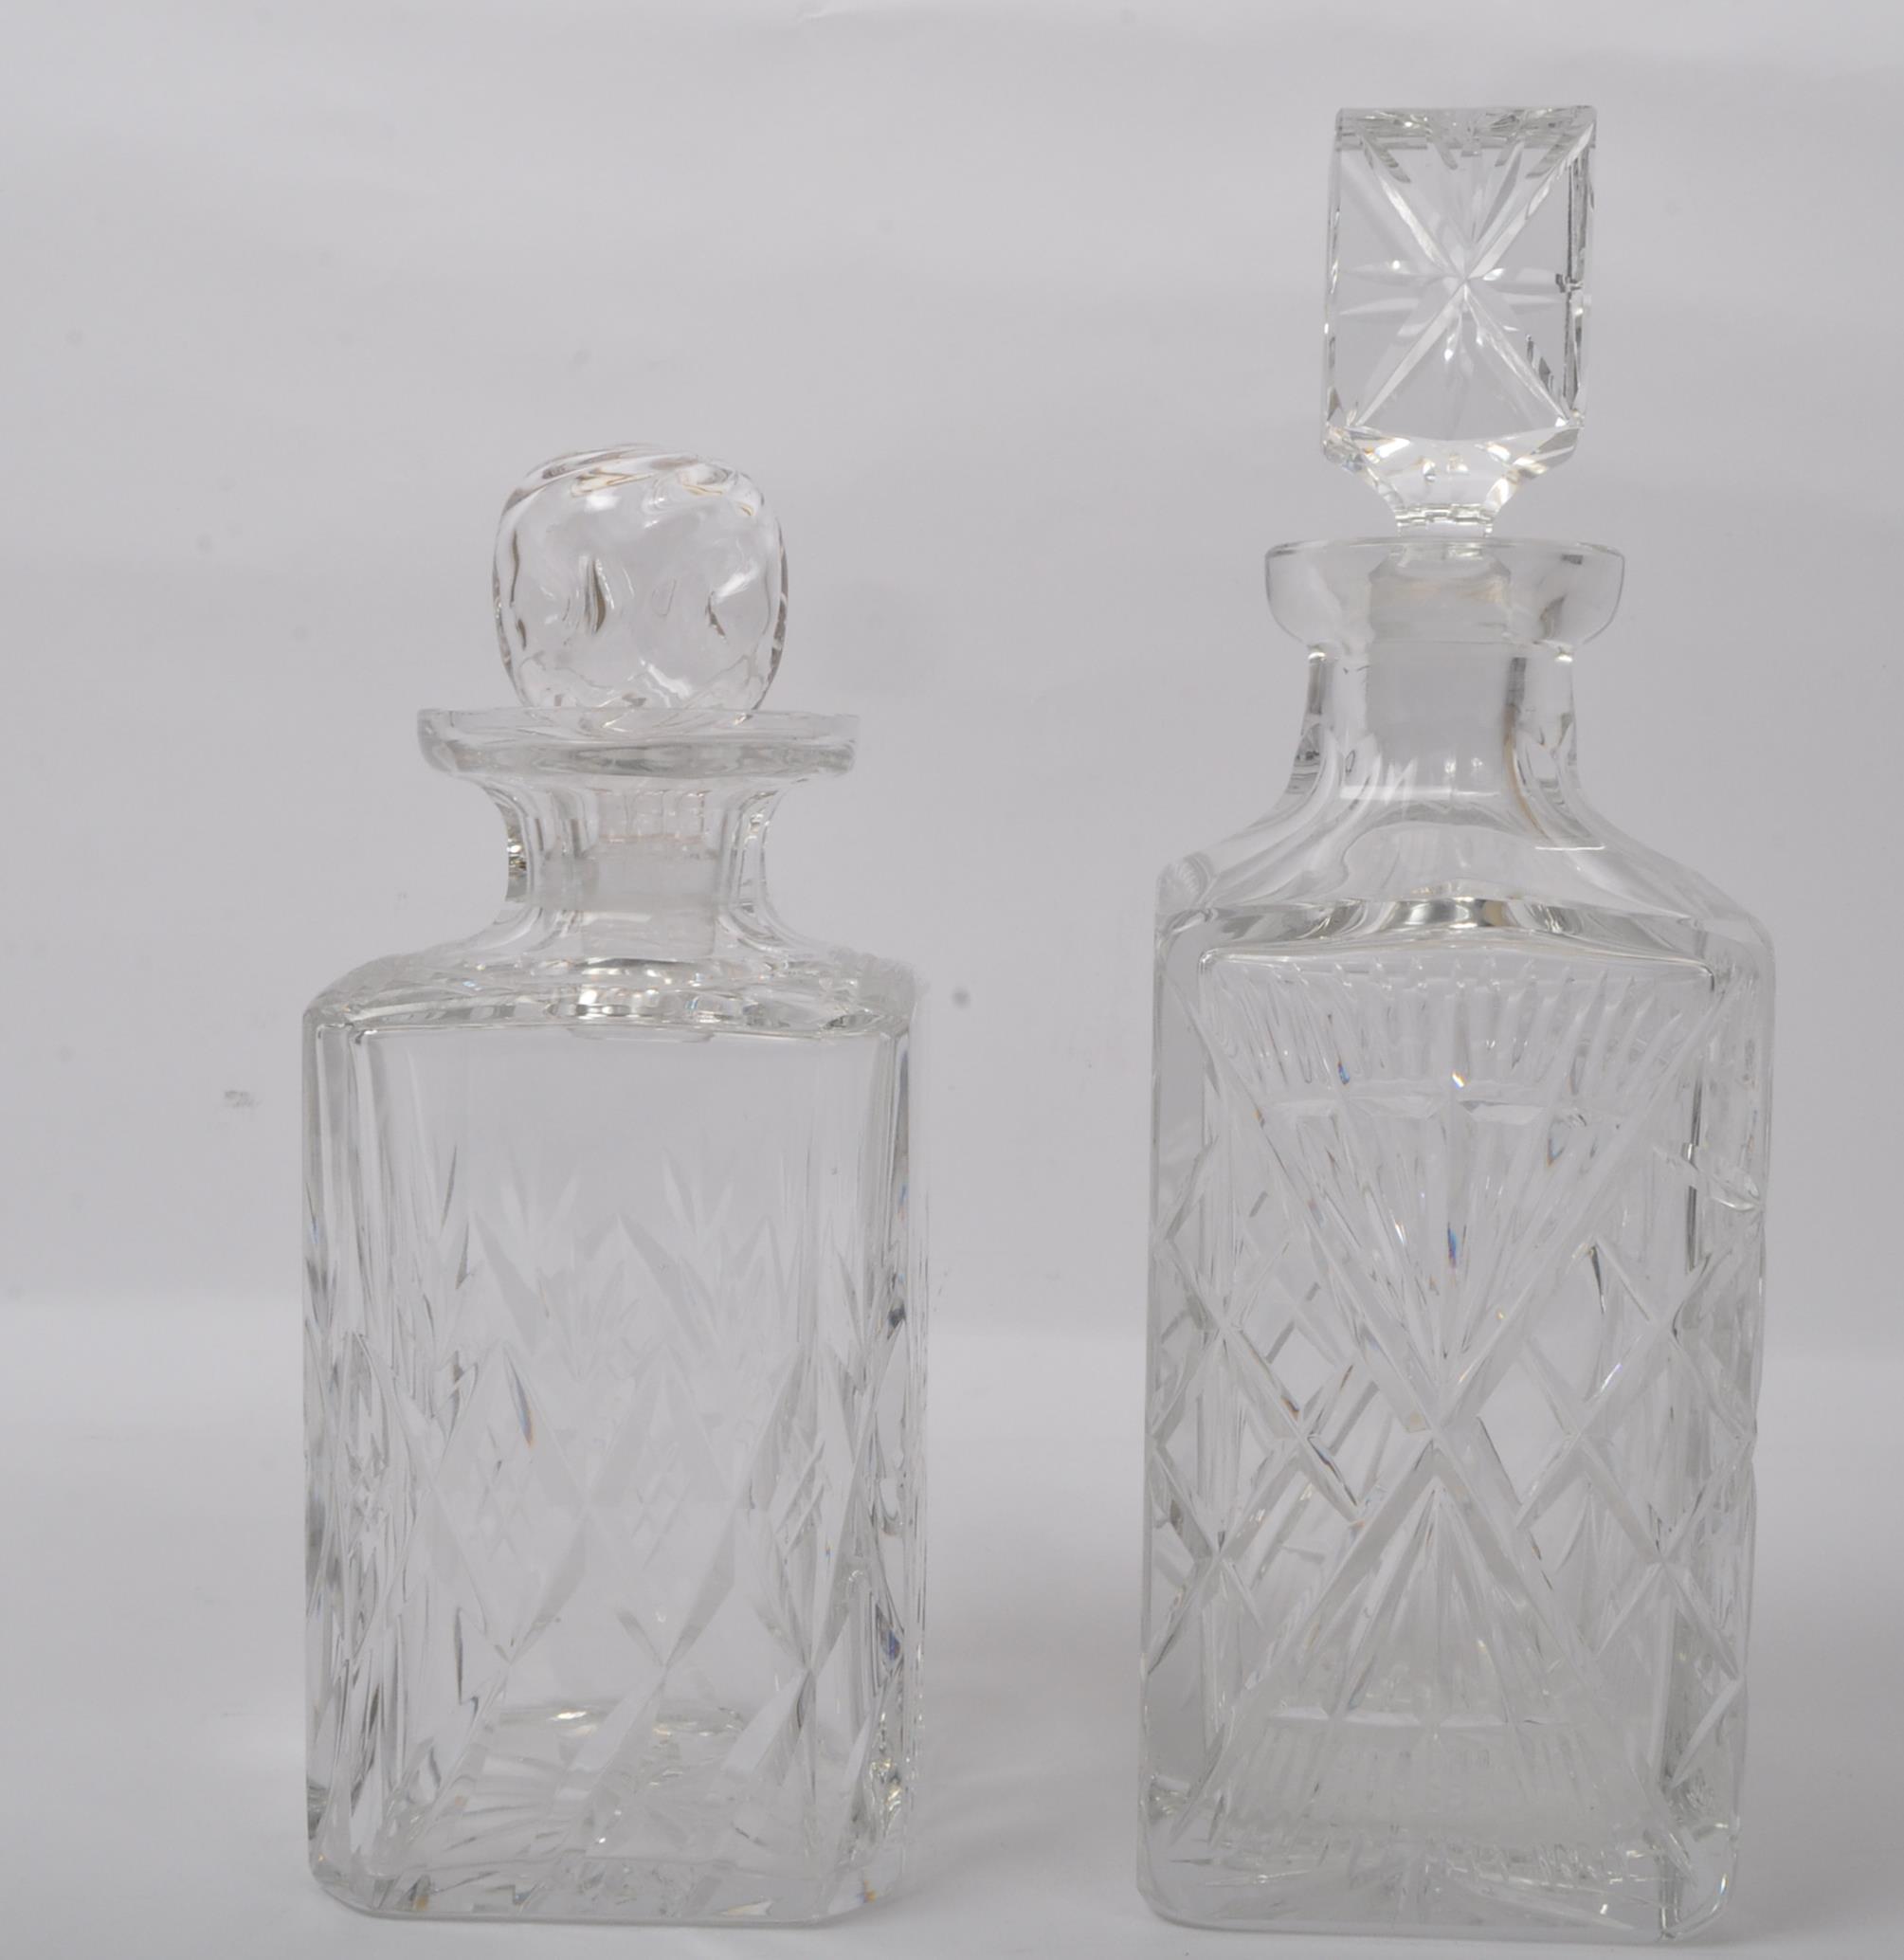 EIGHT LARGE VINTAGE CUT GLASS DECANTERS - Image 5 of 6